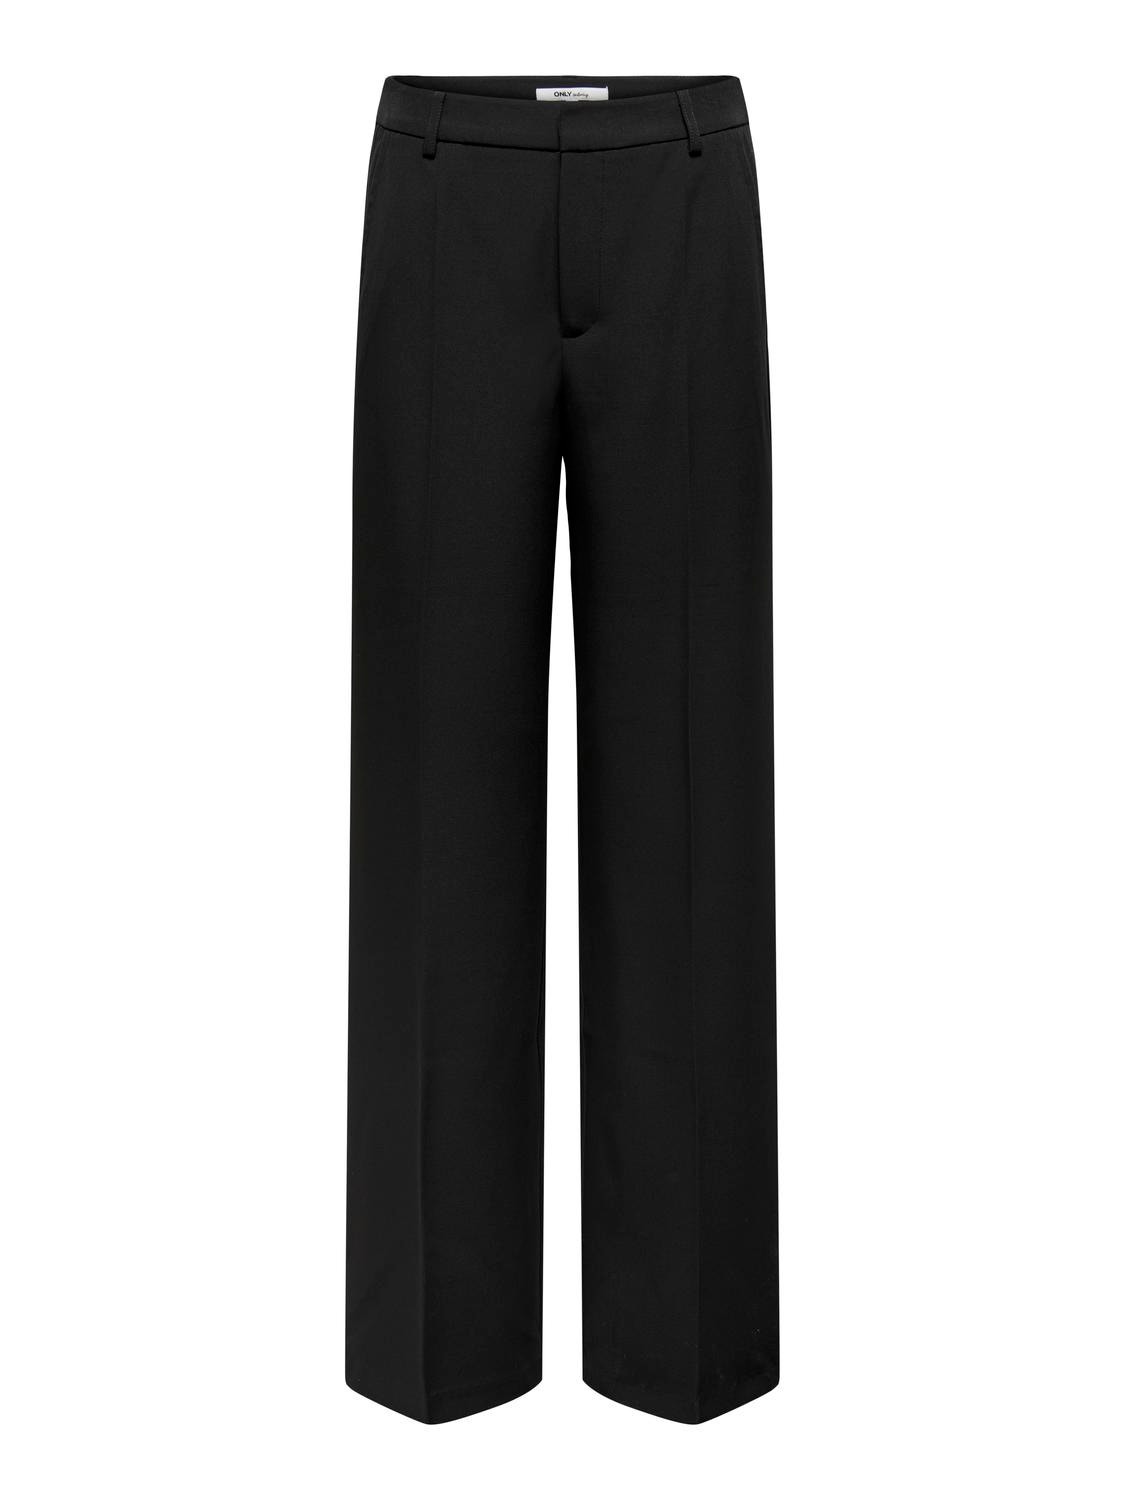 ONLY Talle alto ancho Pantalones -Black - 15258191